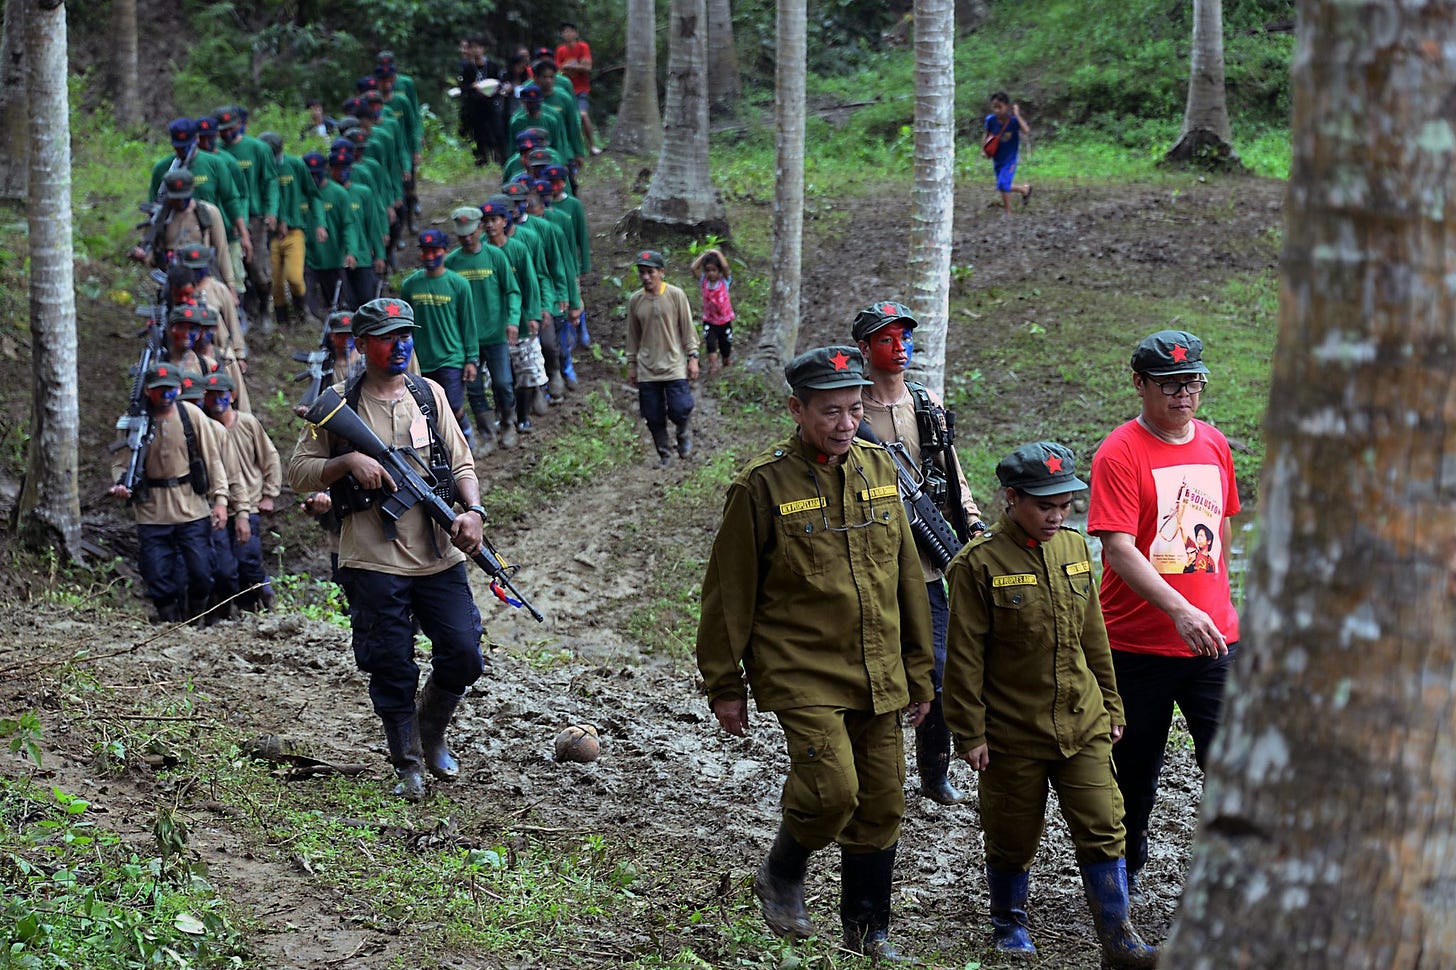 Members of the New People's Army donned in various shaeds of green march through a forest